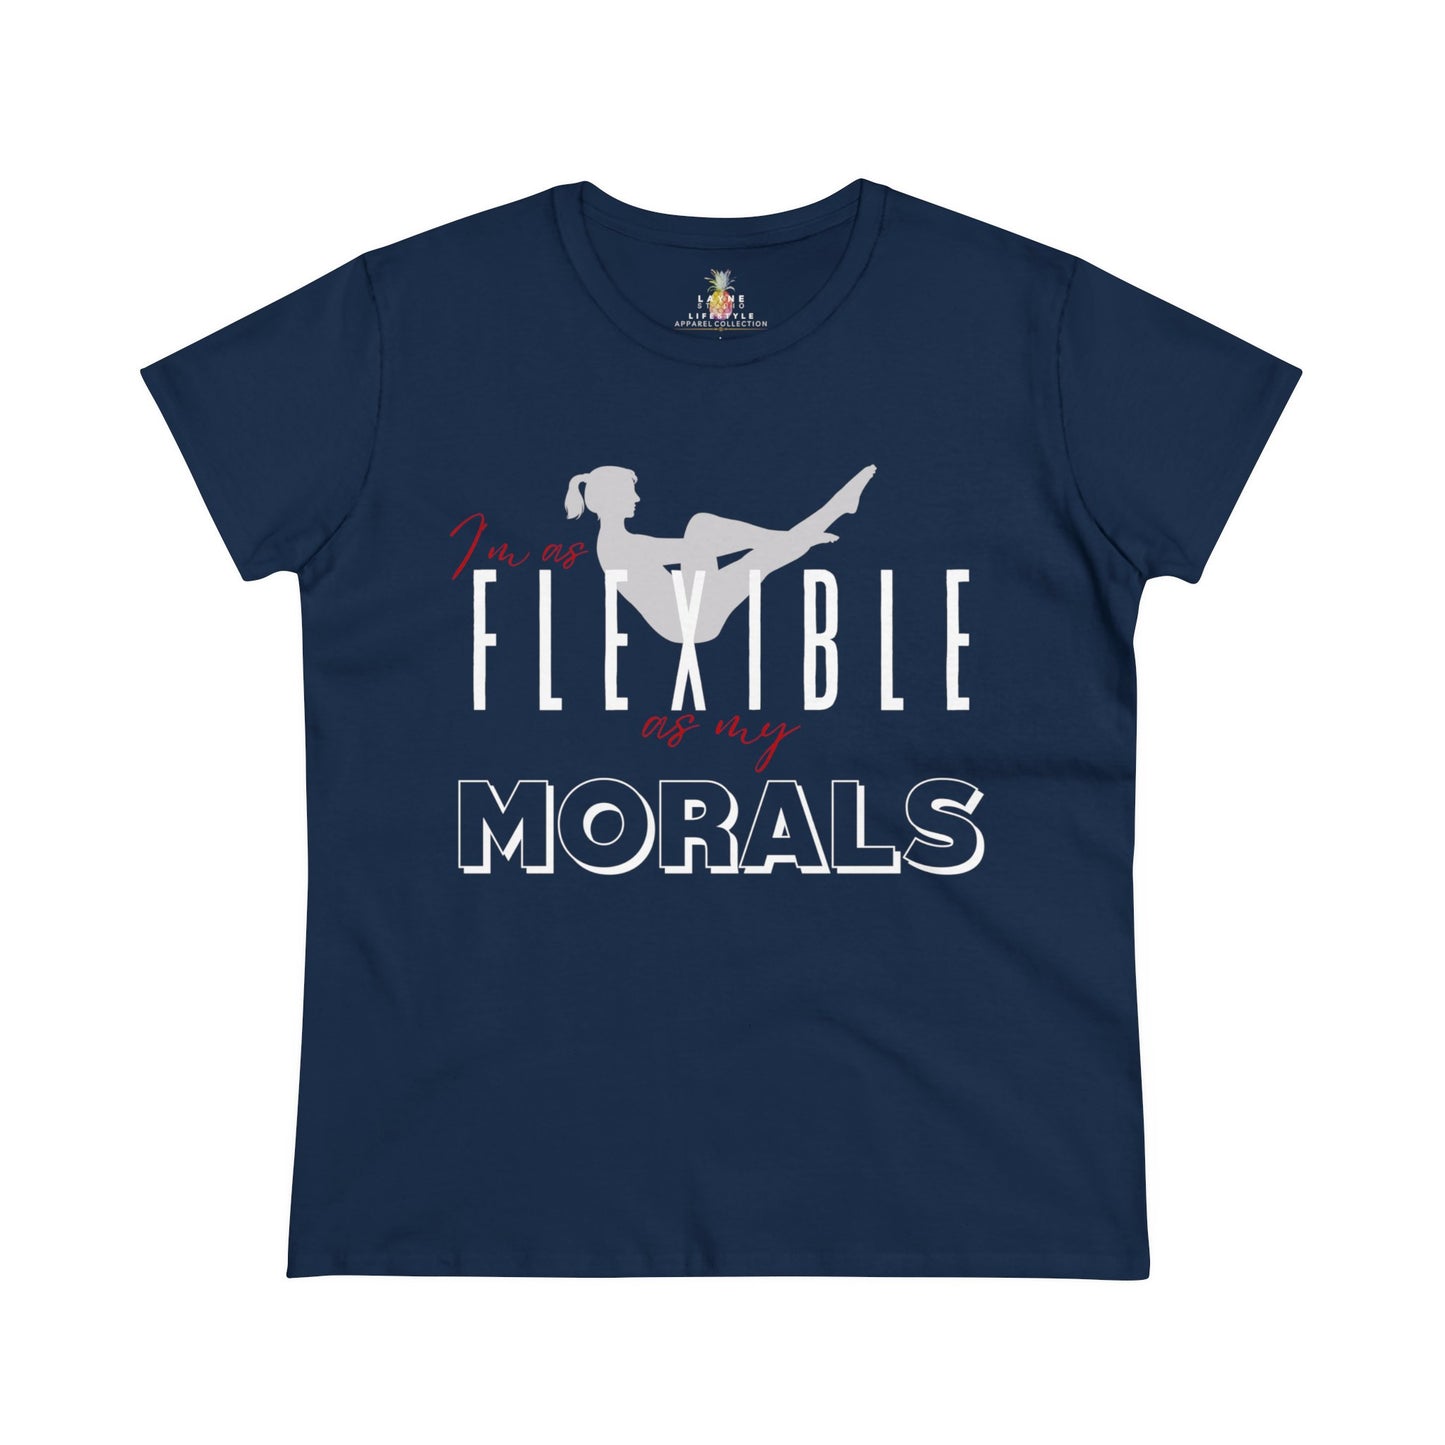 "I'm As Flexible As My Morals" Graphic Women's Midweight Cotton Tee